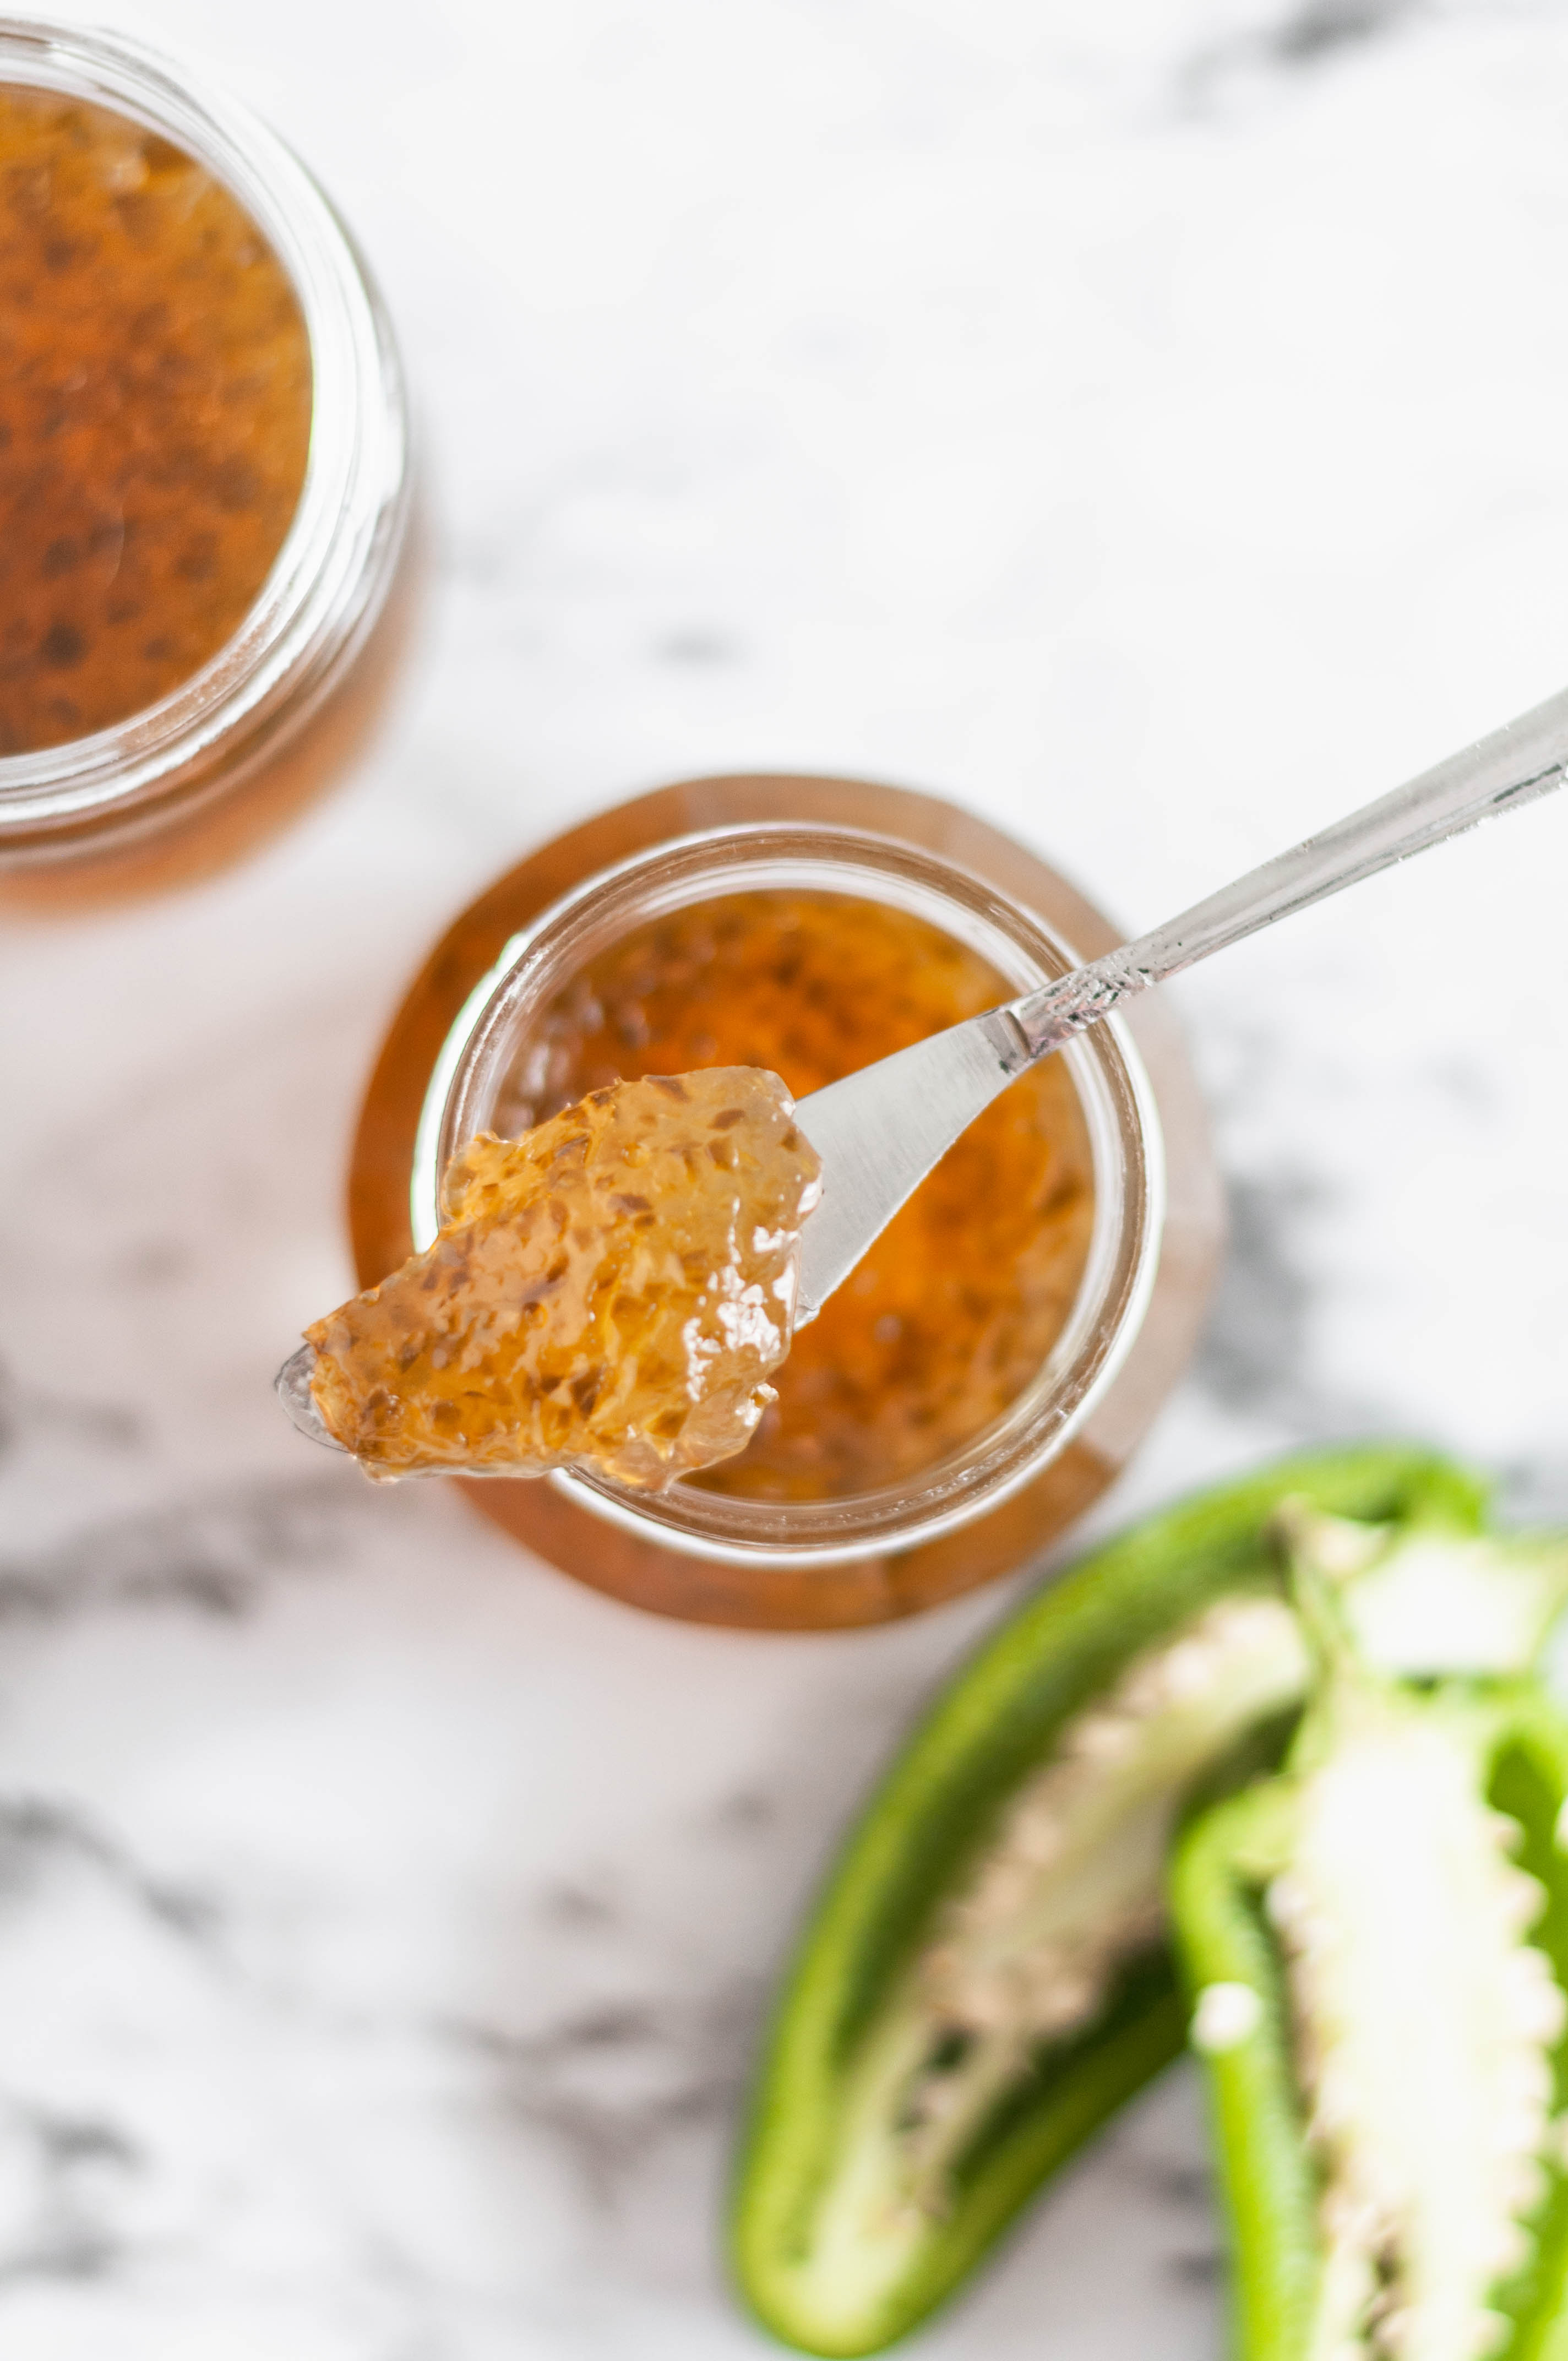 Homemade Jalapeno Jelly is easier than you would think and so delicious on all the things. Slather it on hot cornbread, a juicy burger or use it as a dip.